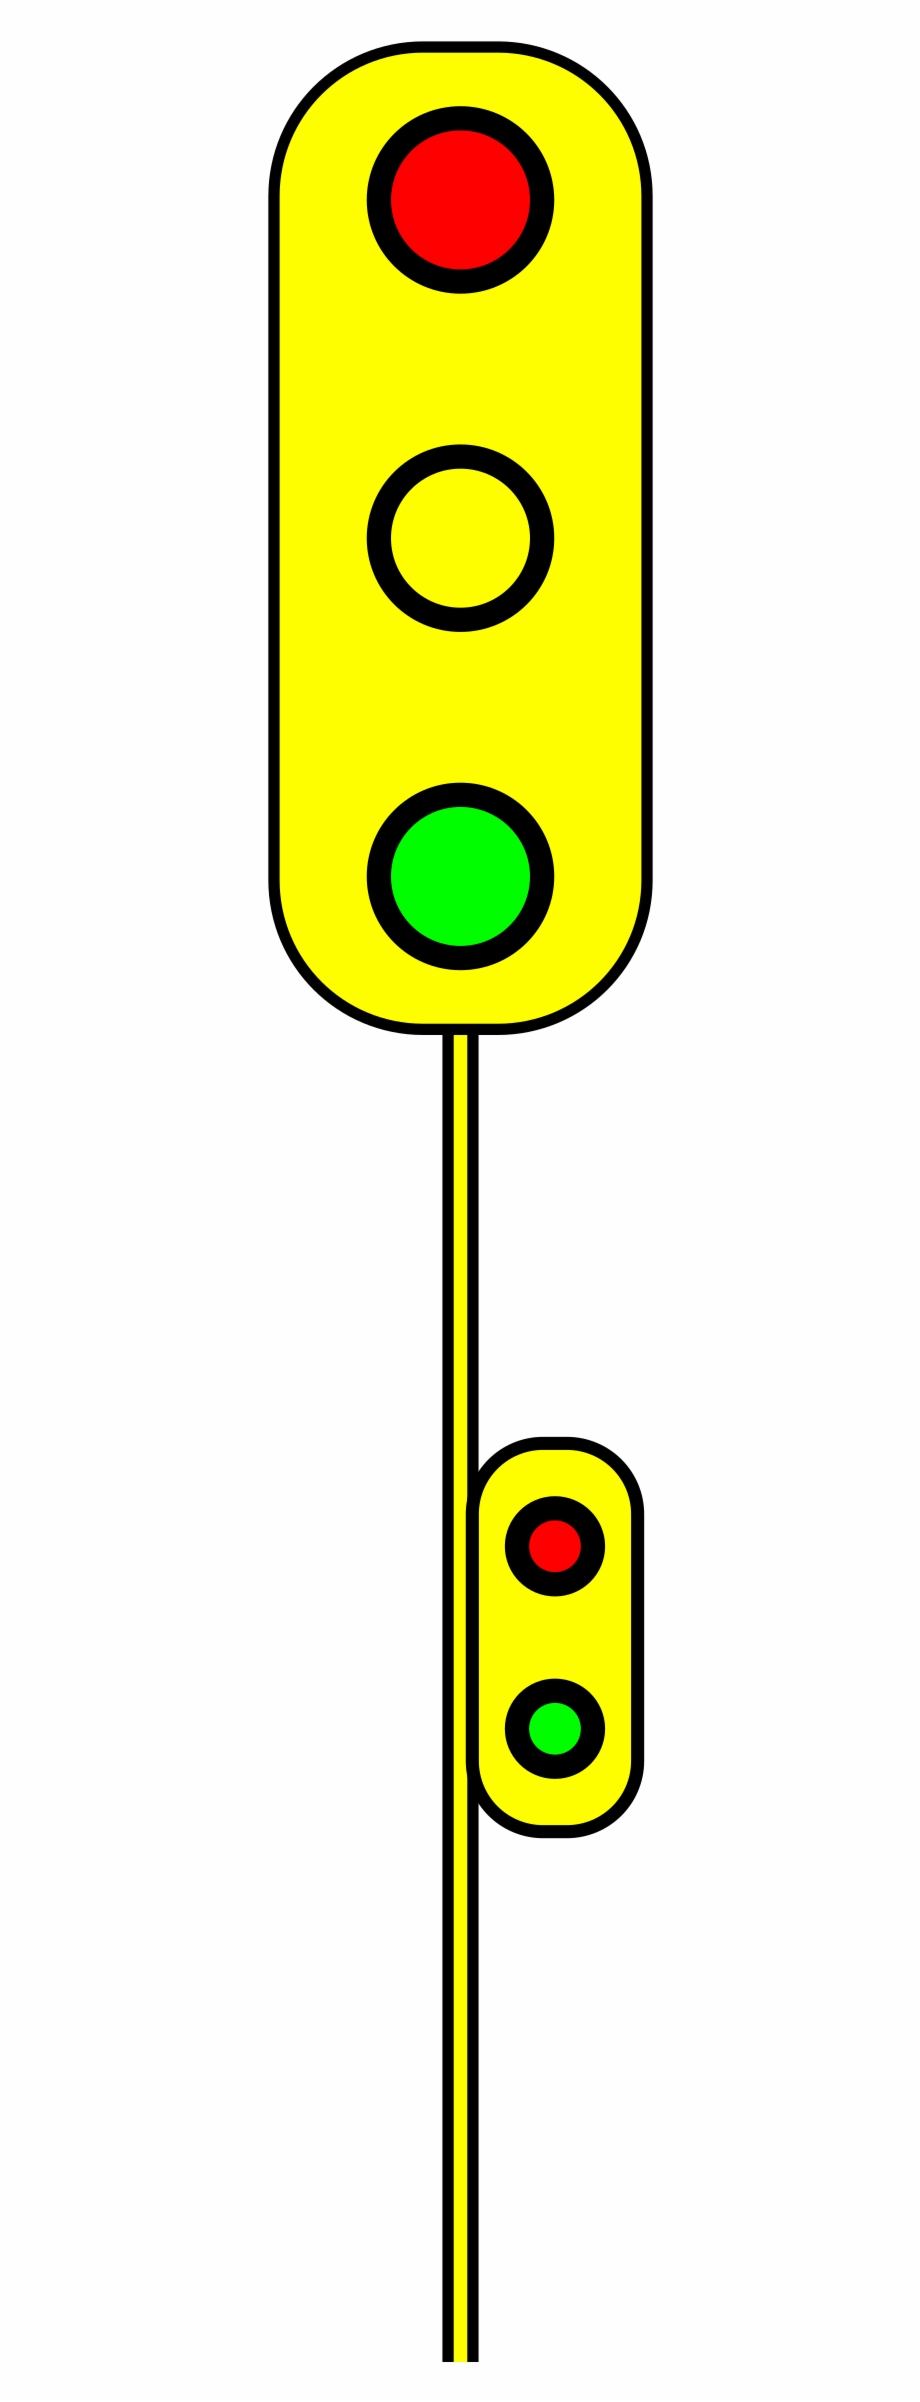 This Free Icons Png Design Of Traffic Light